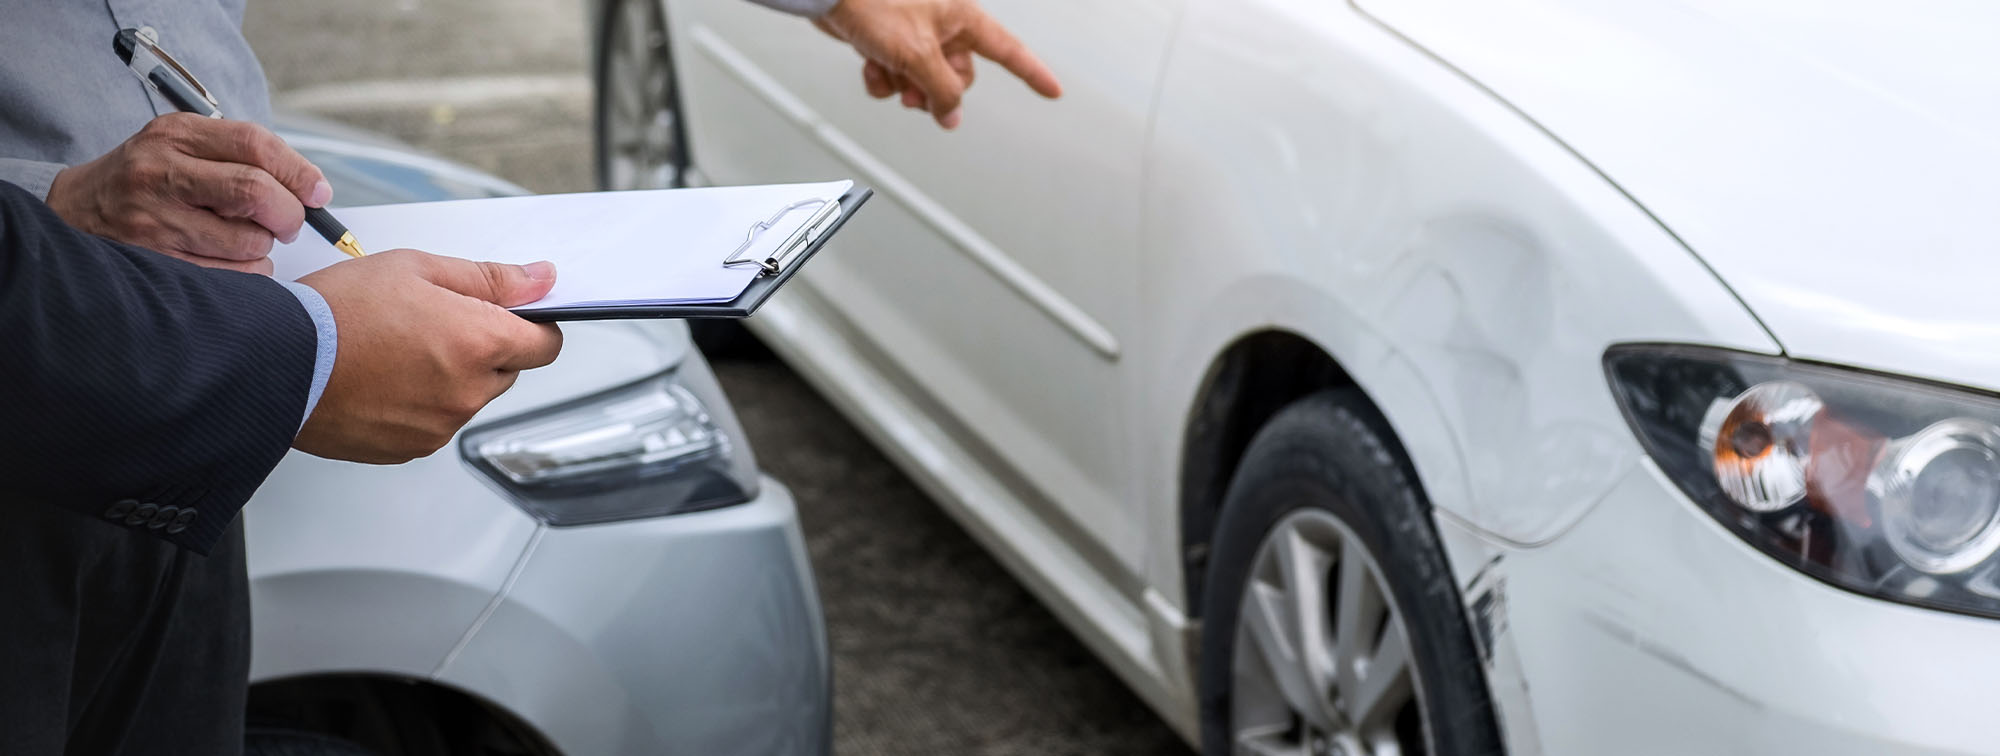 Person signing documents pointing at a damaged vehicle